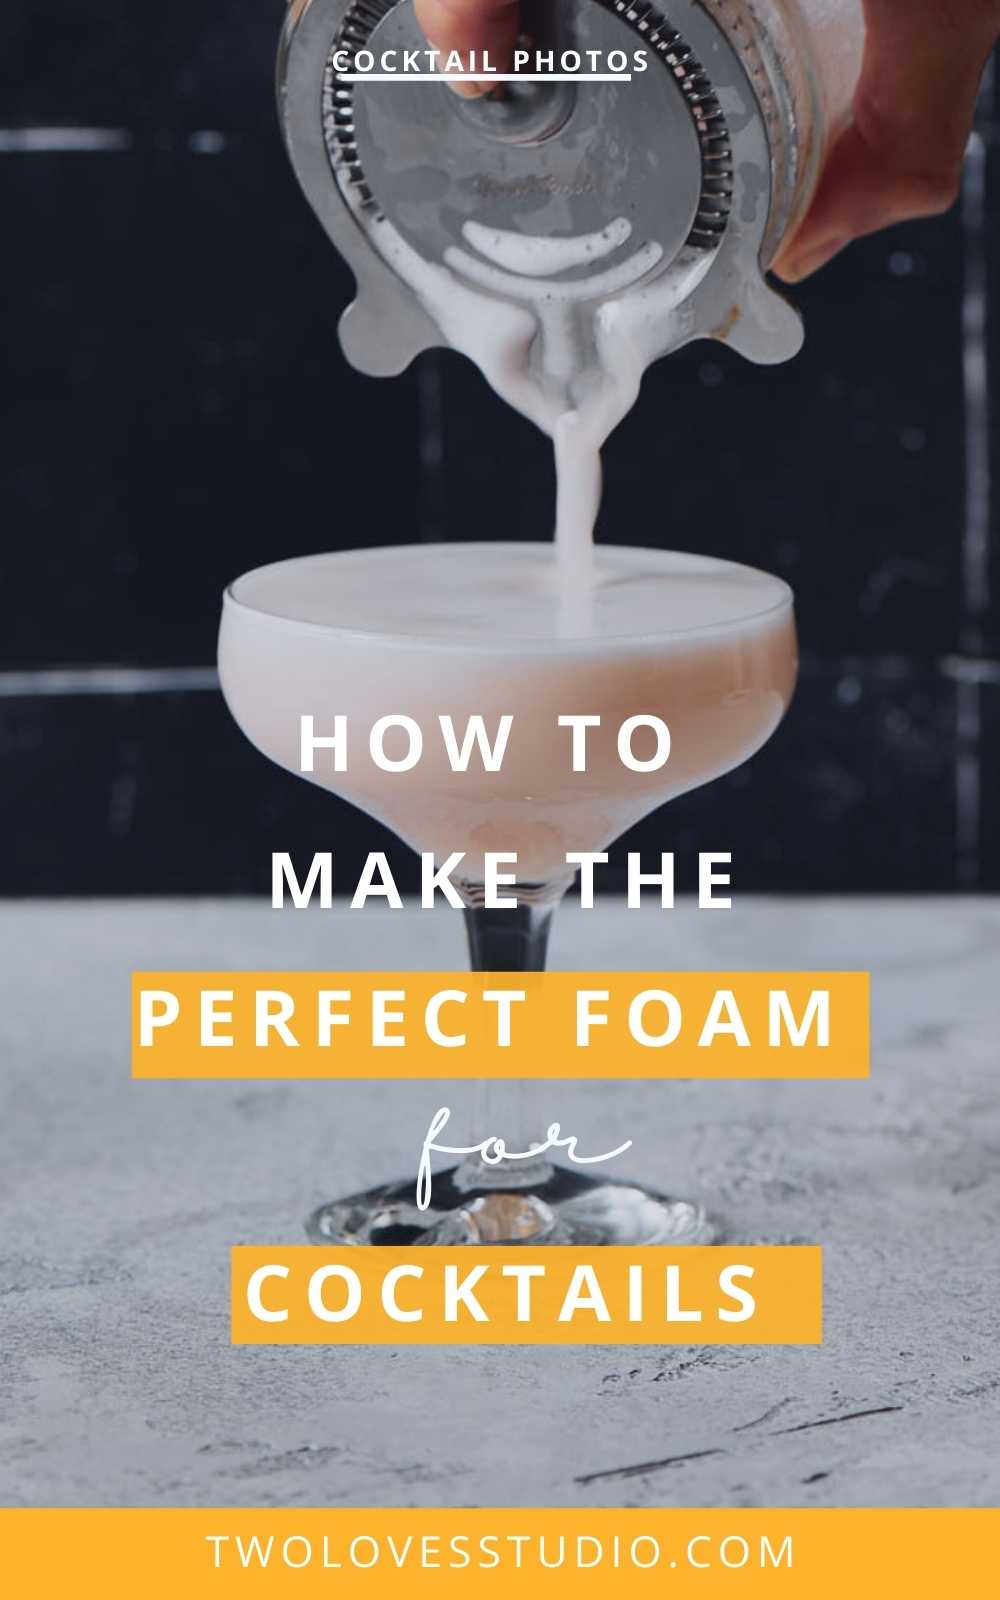 https://twolovesstudio.com/wp-content/uploads/2021/06/Dry-Shake-Cocktail-Technique-How-to-Make-the-Perfect-Foam-For-Cocktails_8.jpg